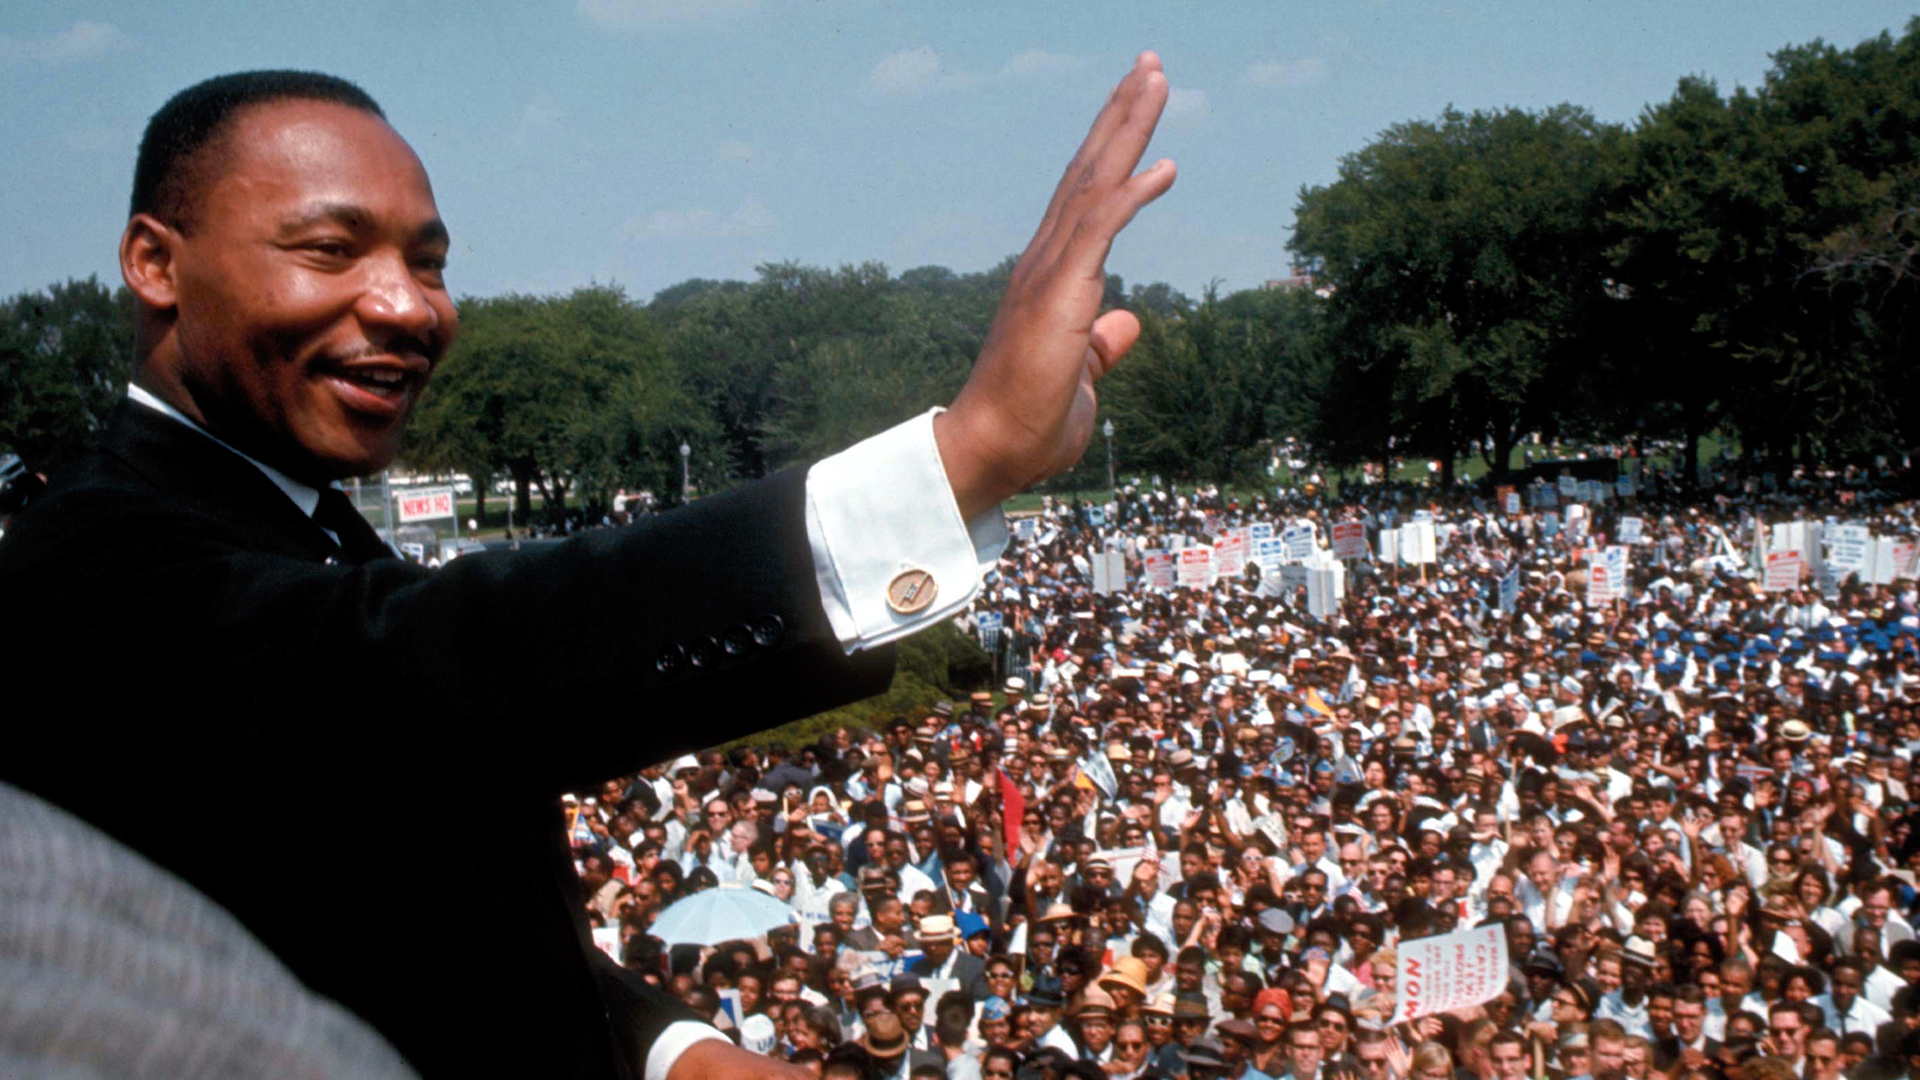 Martin Luther King Jr. - Call to Activism